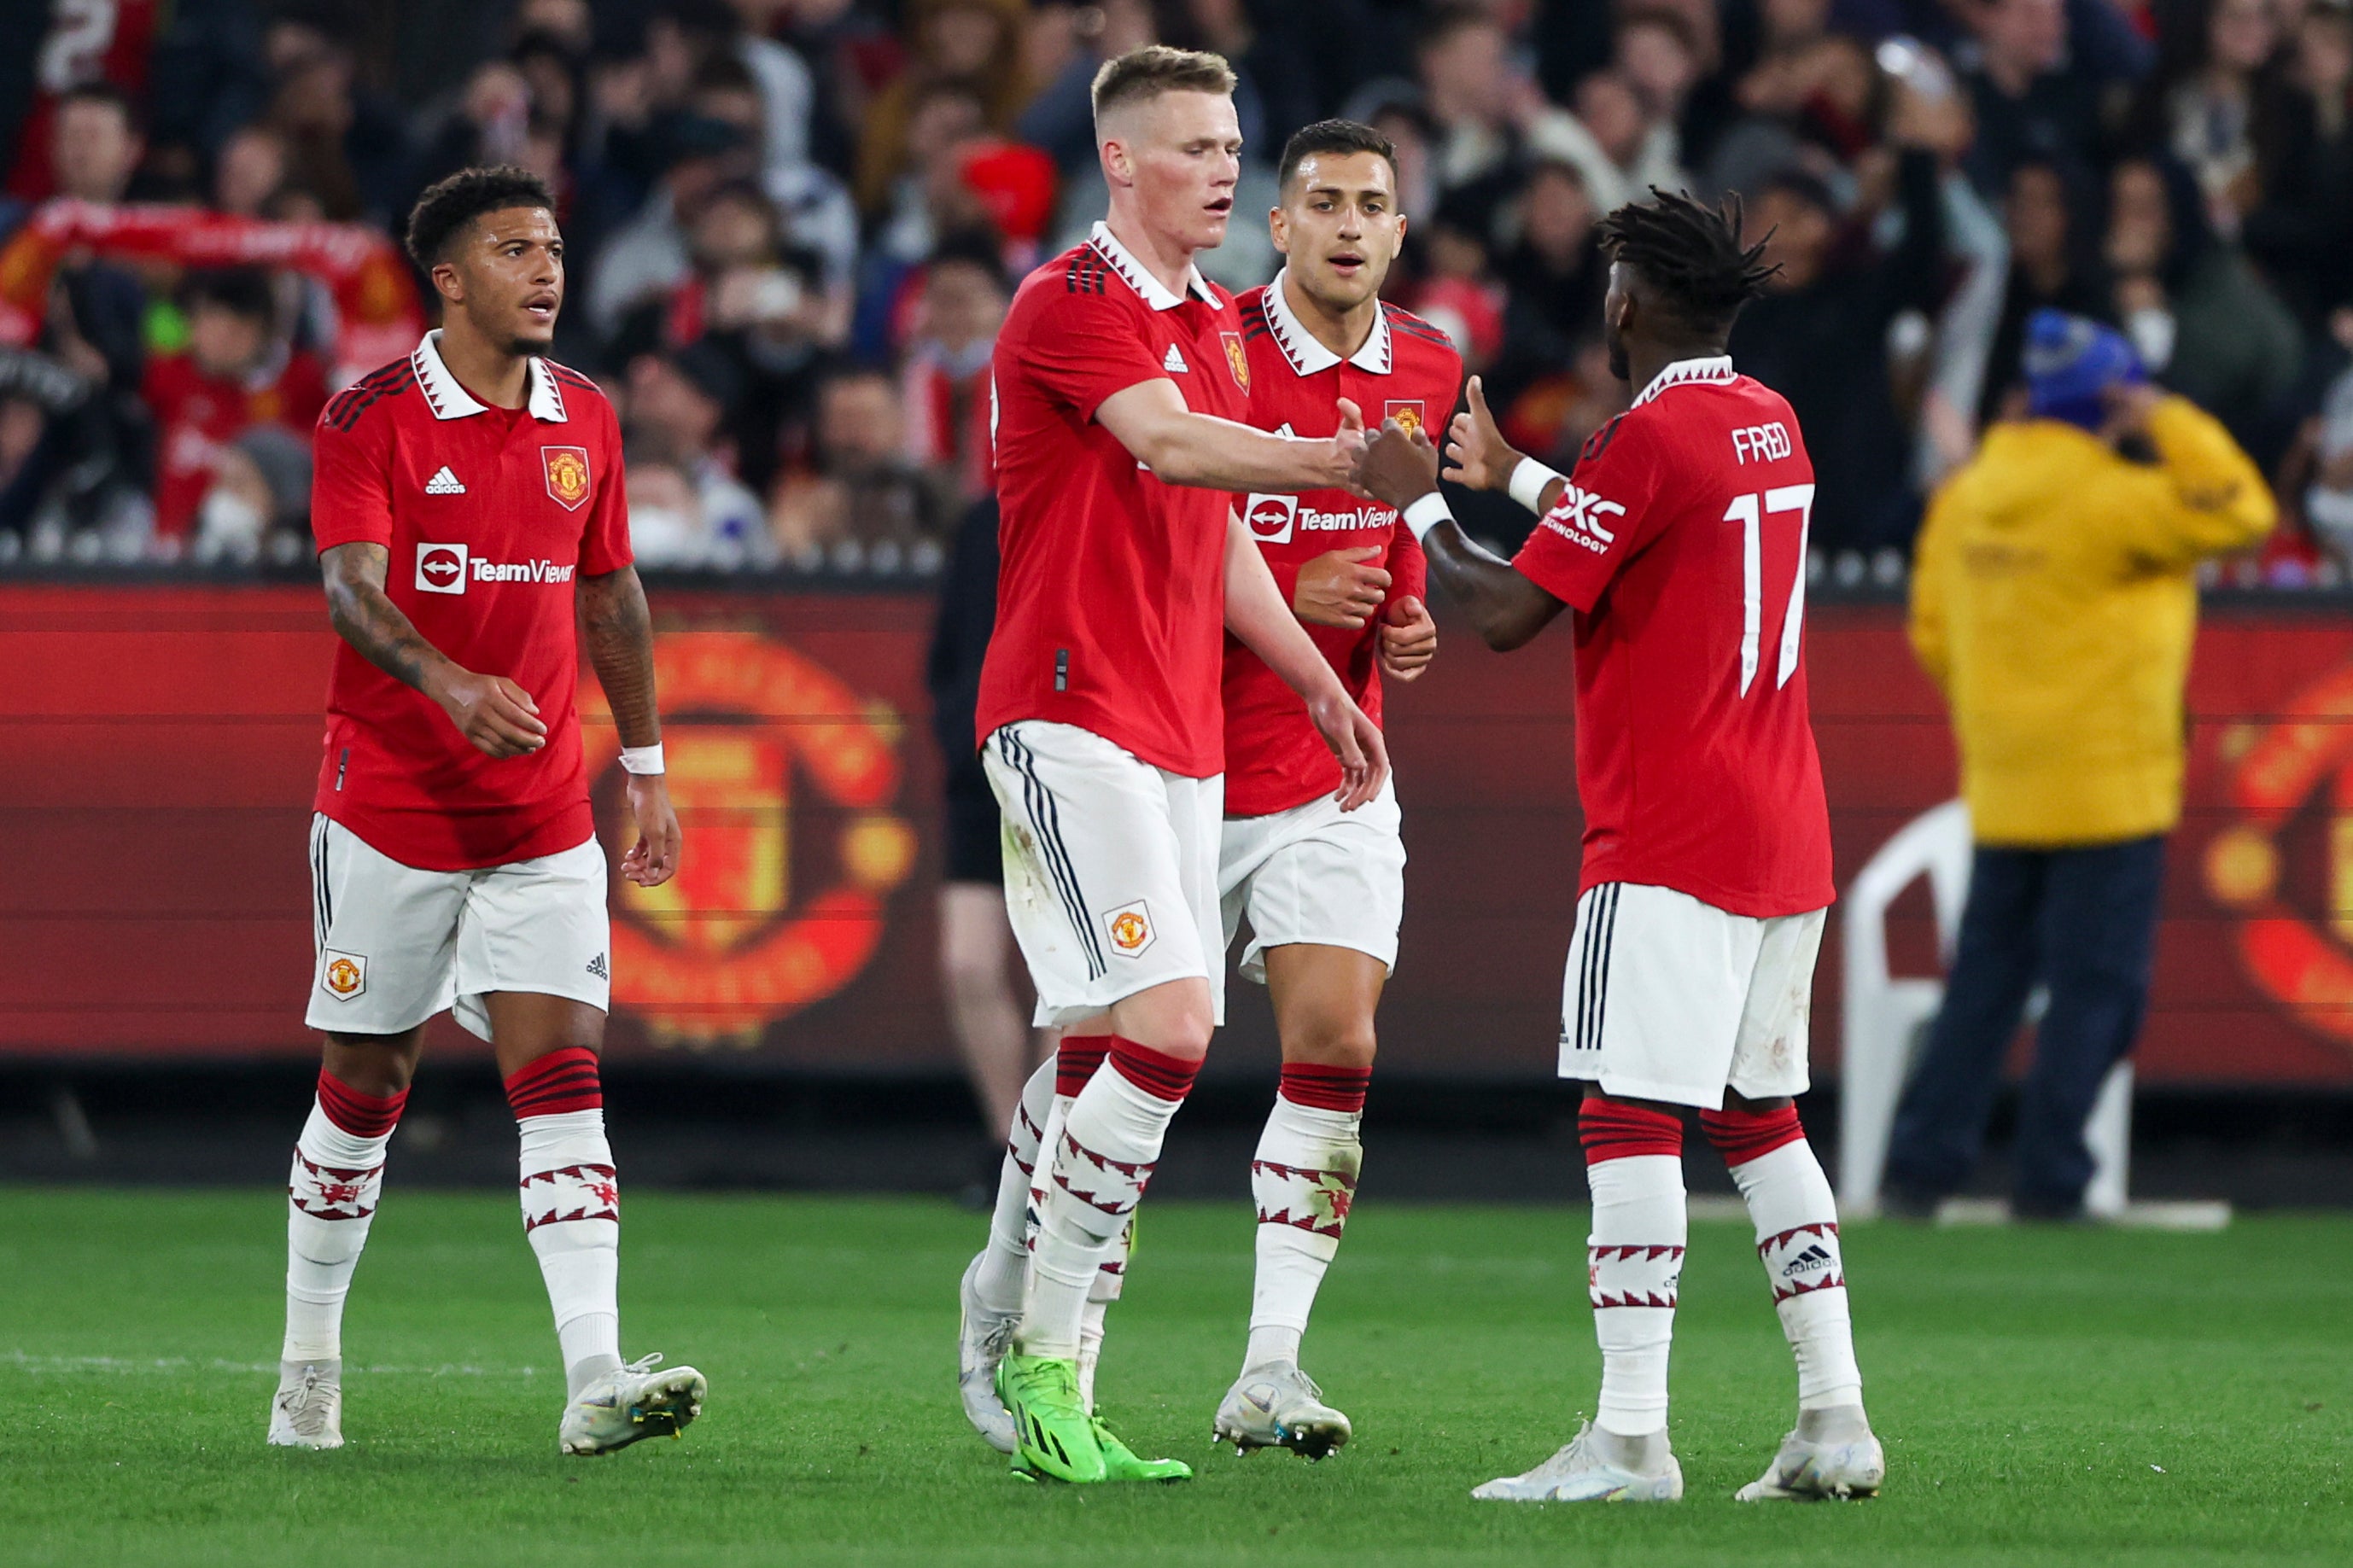 Manchester United come from behind to seal preseason victory in